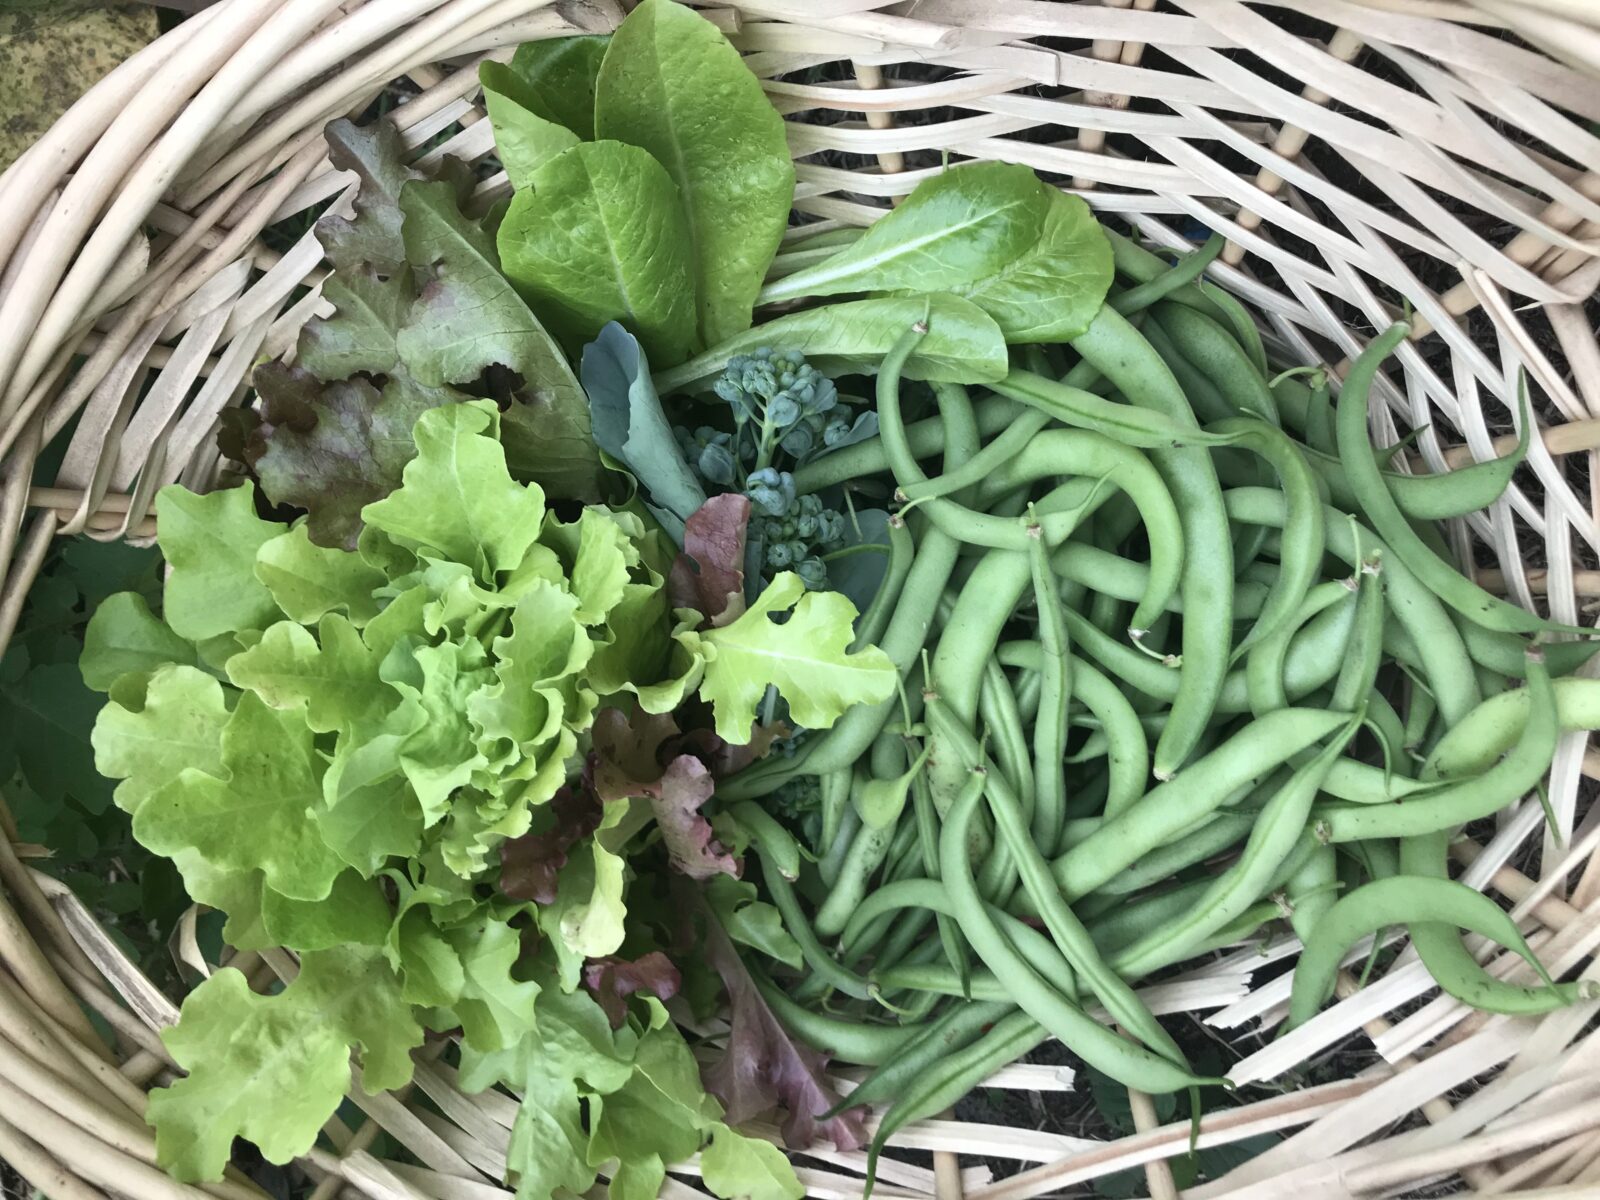 Planting in February in Florida includes lettuce and green beans